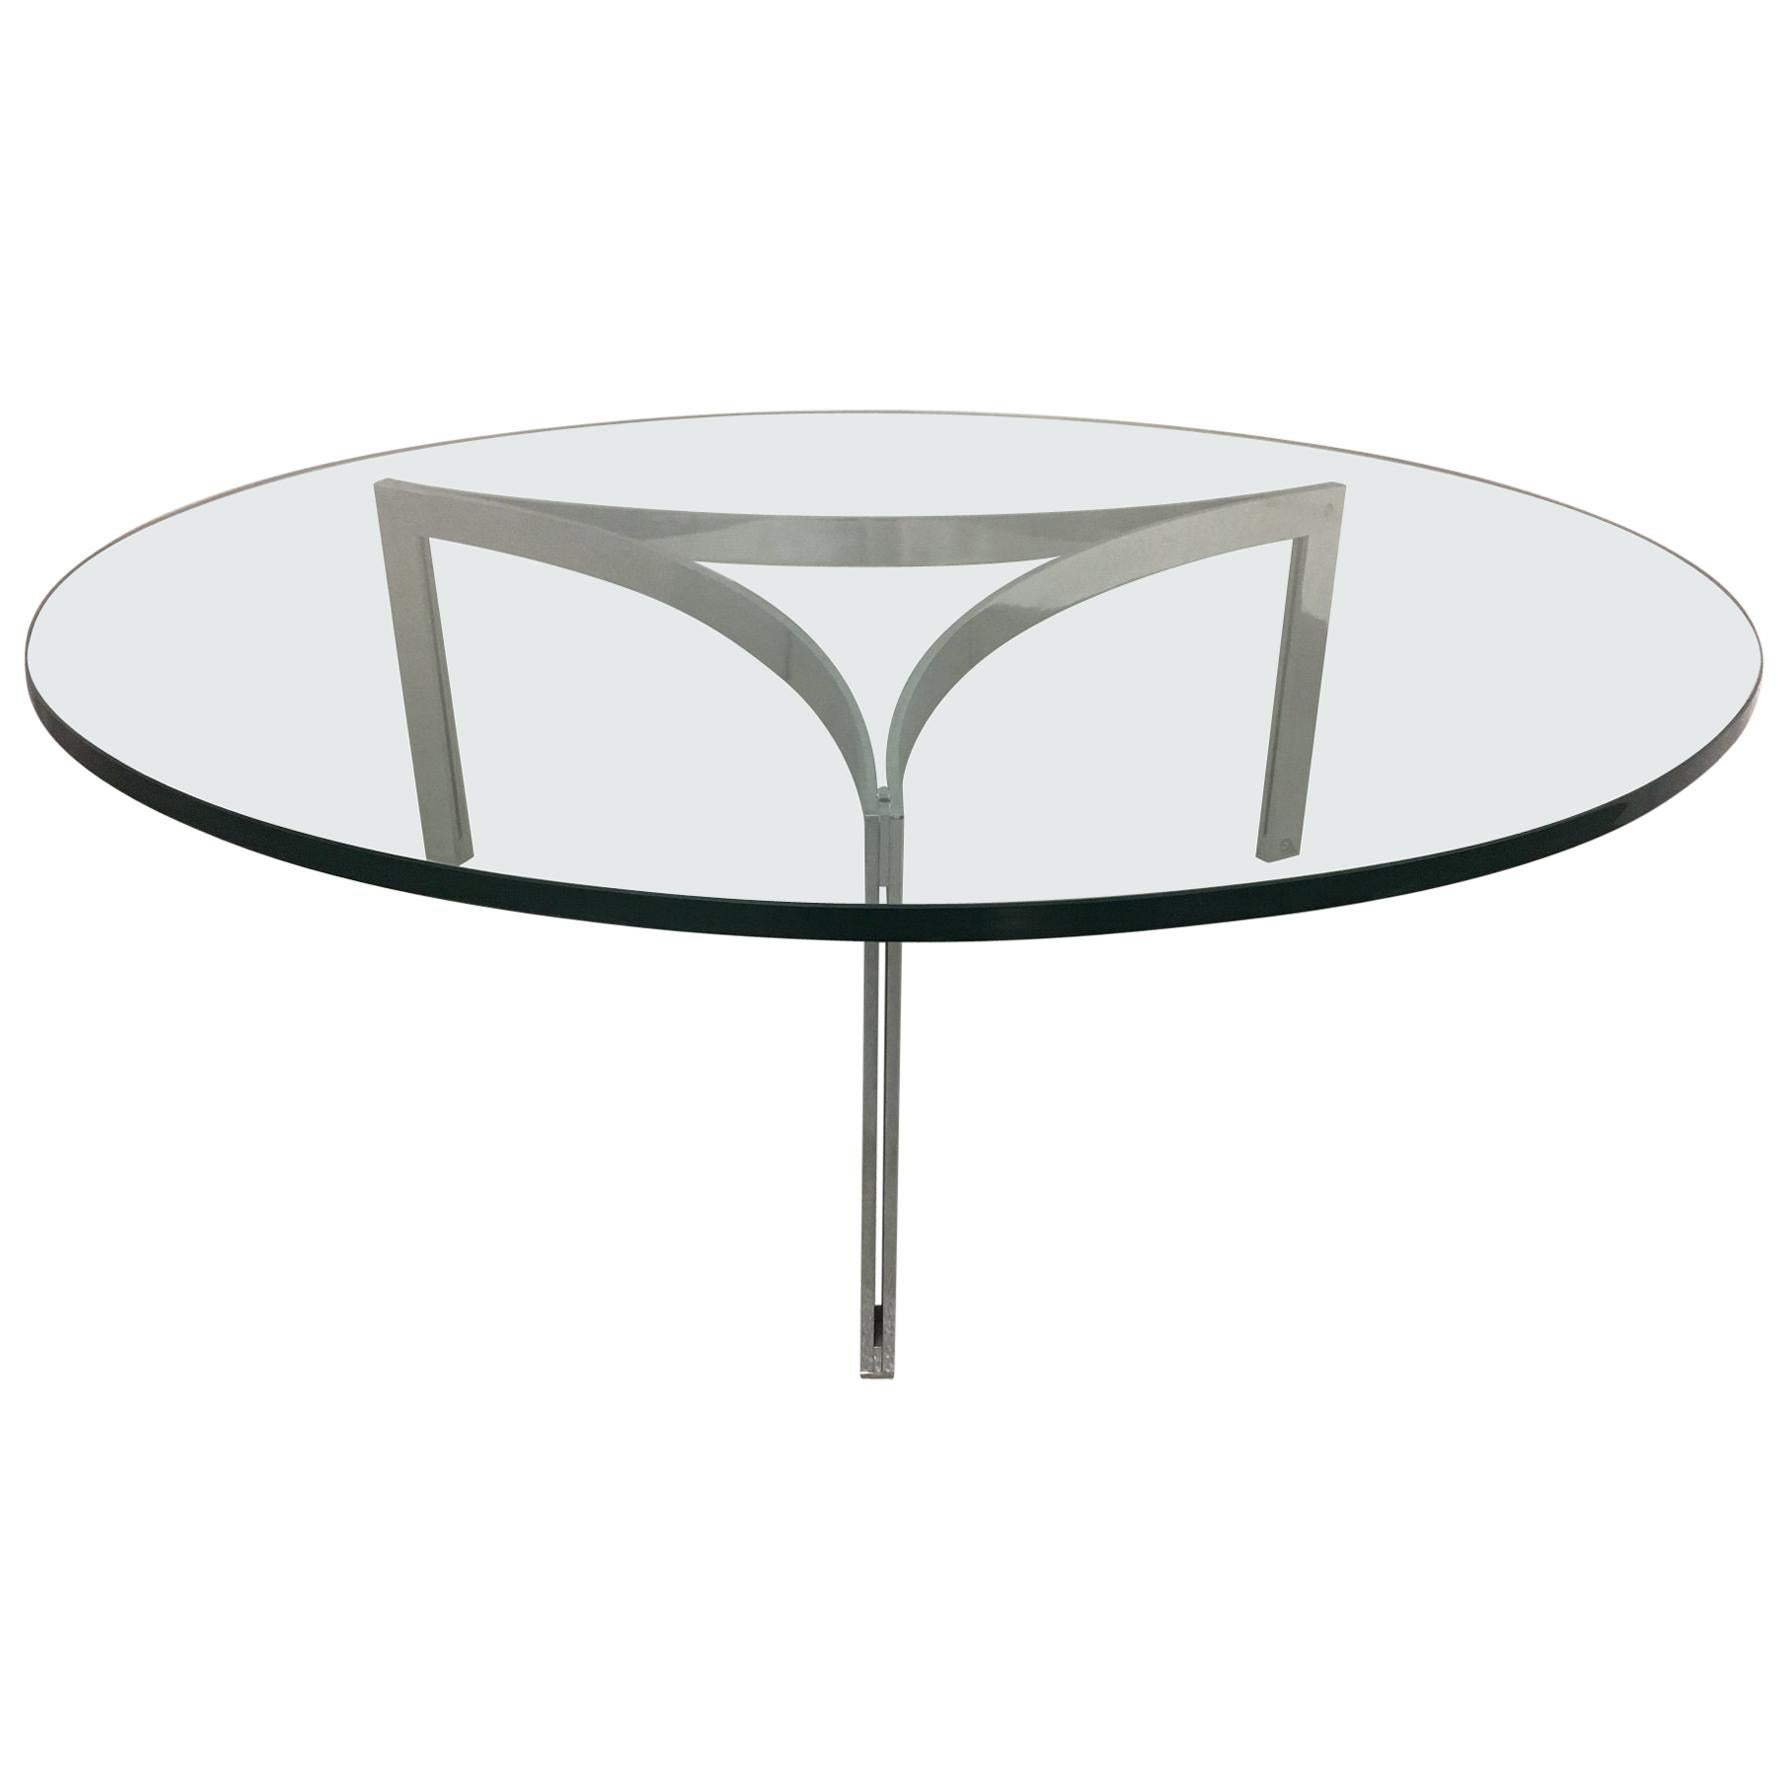 1960s Chrome and Glass Coffee Table For Sale